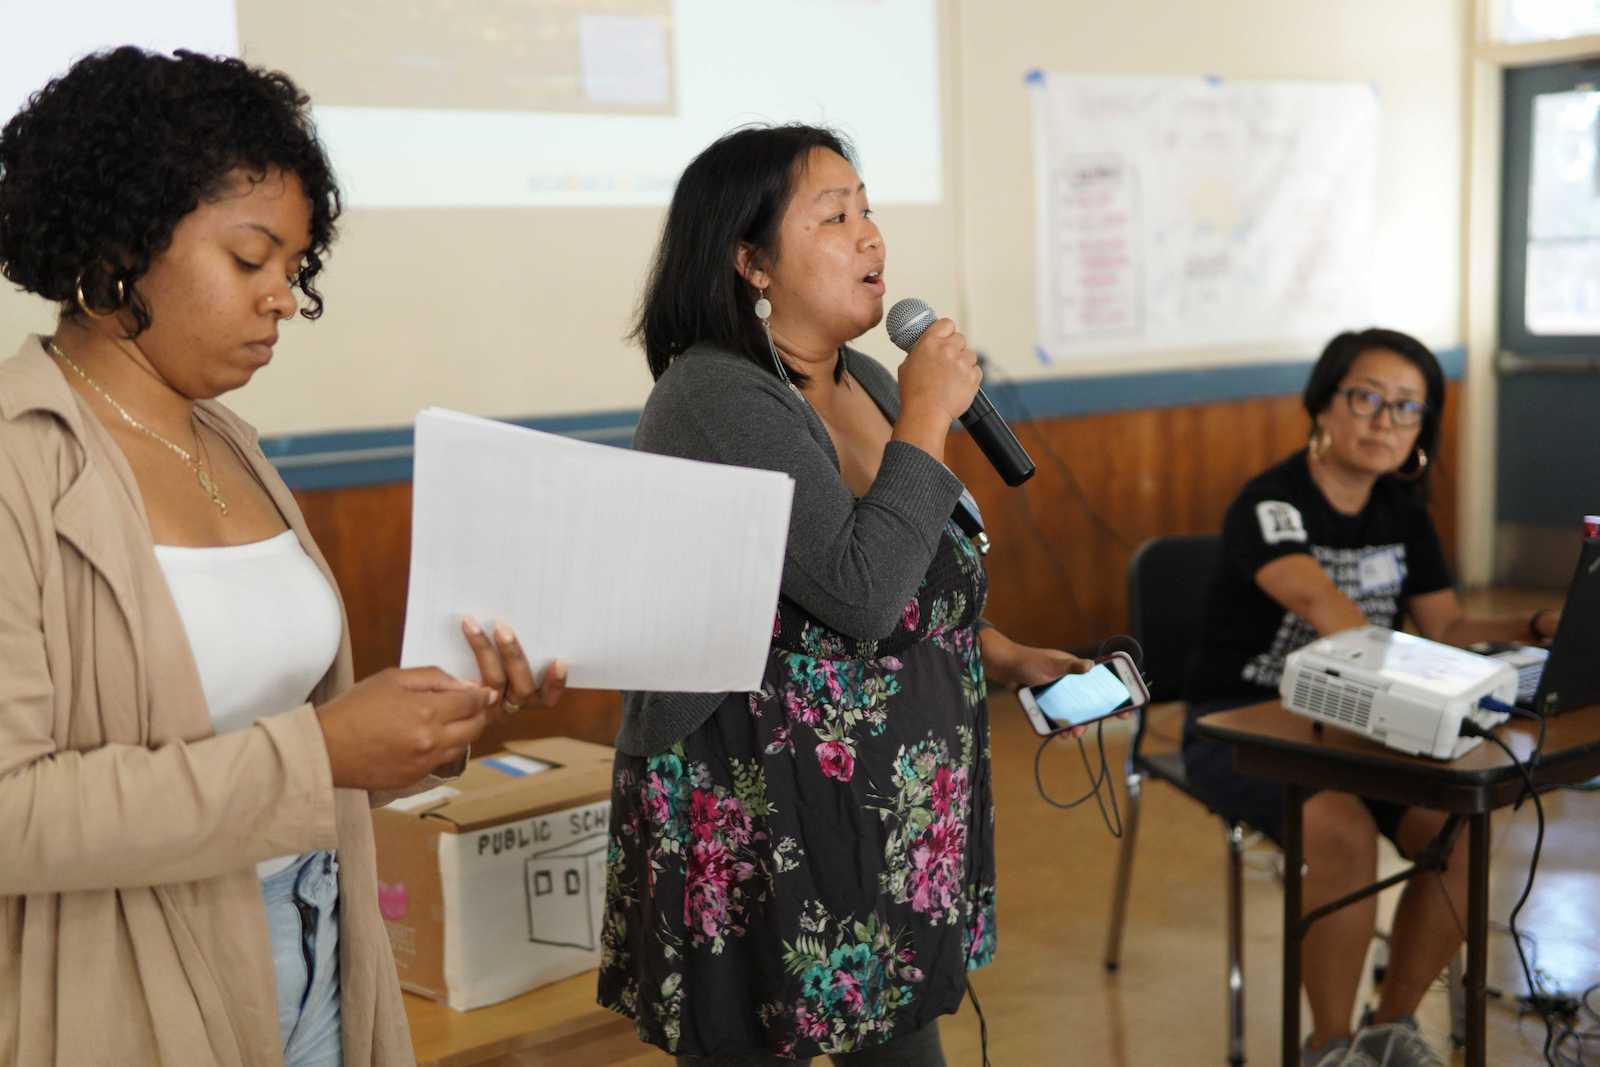 A woman in the center of the photo holds a mic and a cell phone while speaking at a community event. She is flanked by two other women who appear to be listening to her.